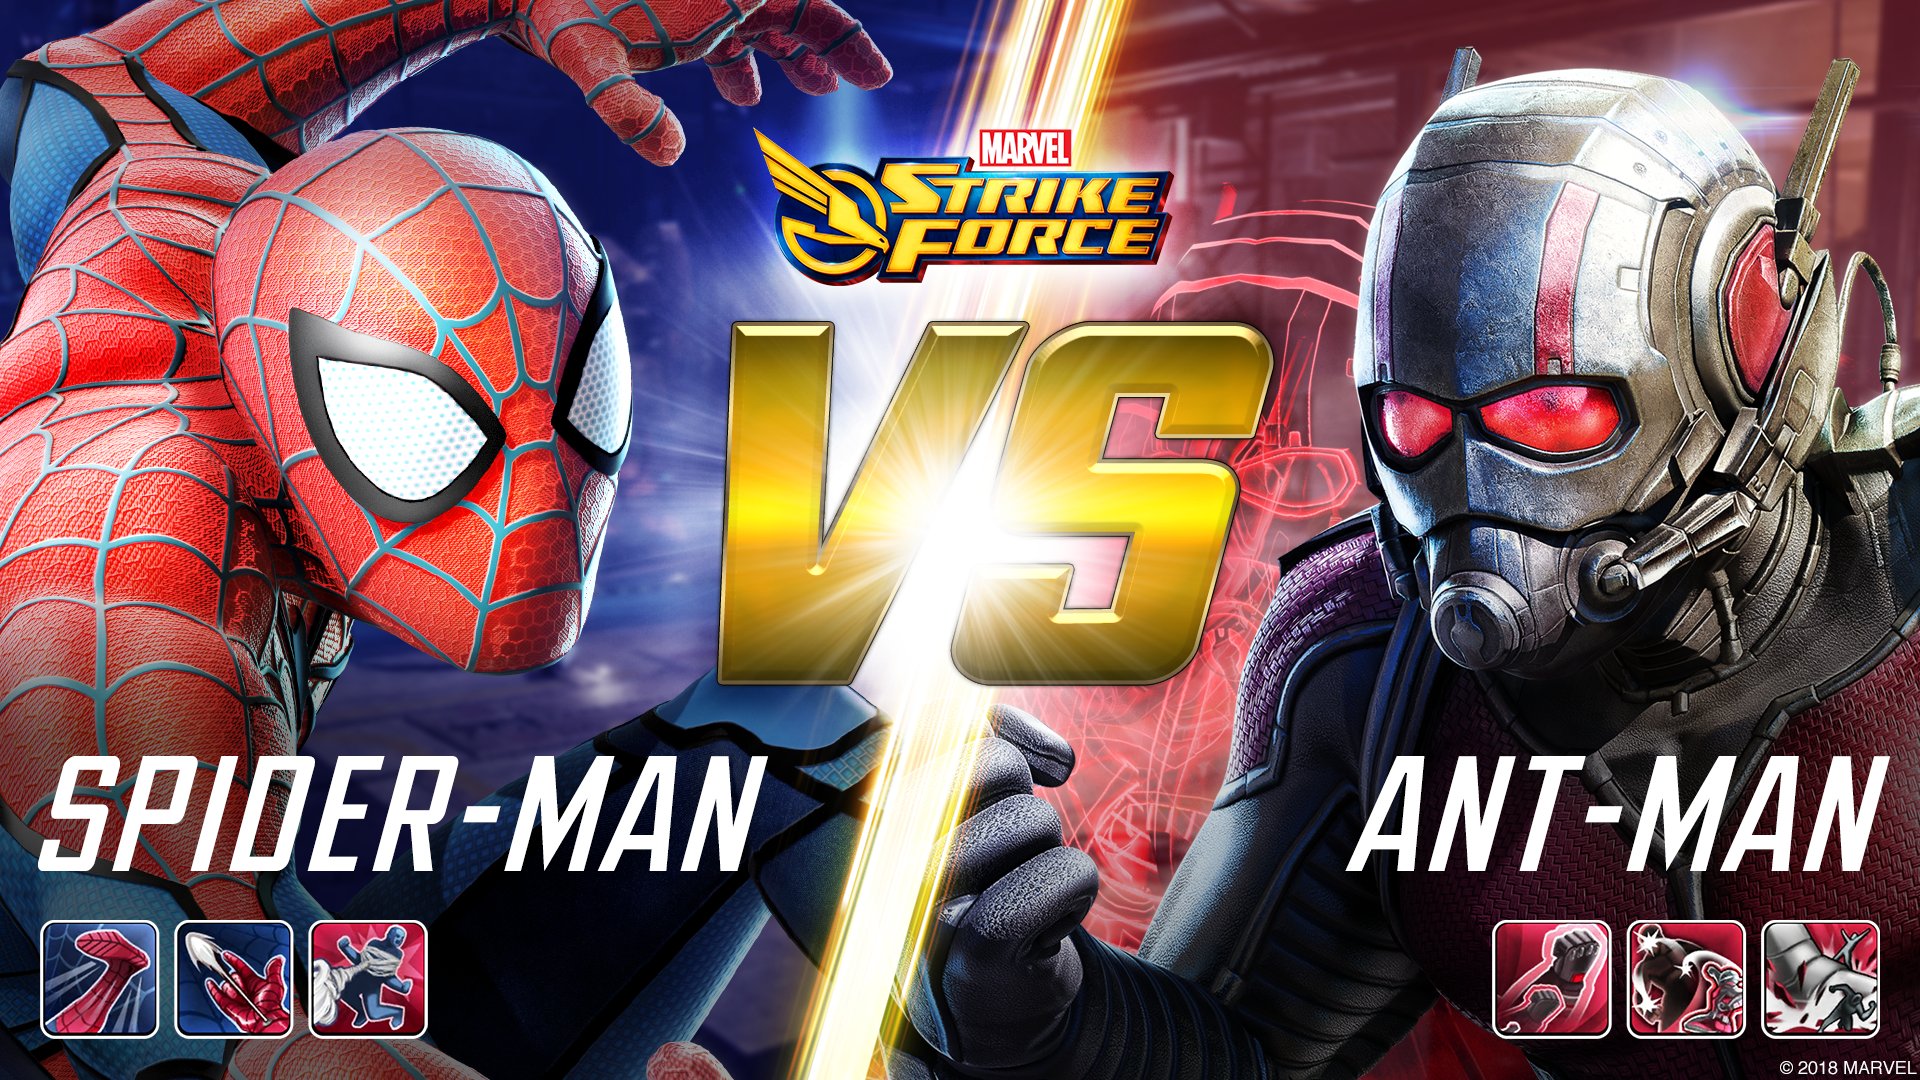 Marvel Strike Force on Twitter "Who do you recruit to